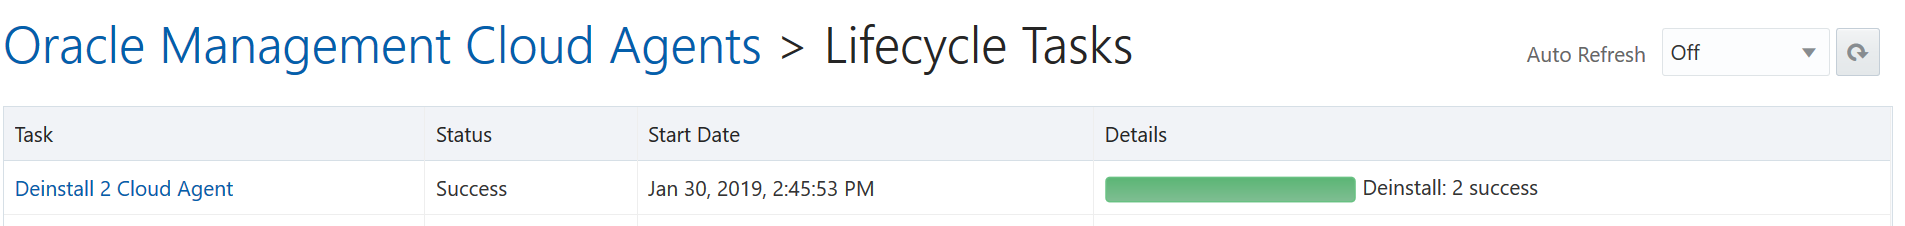 Lifecycle deinstall success